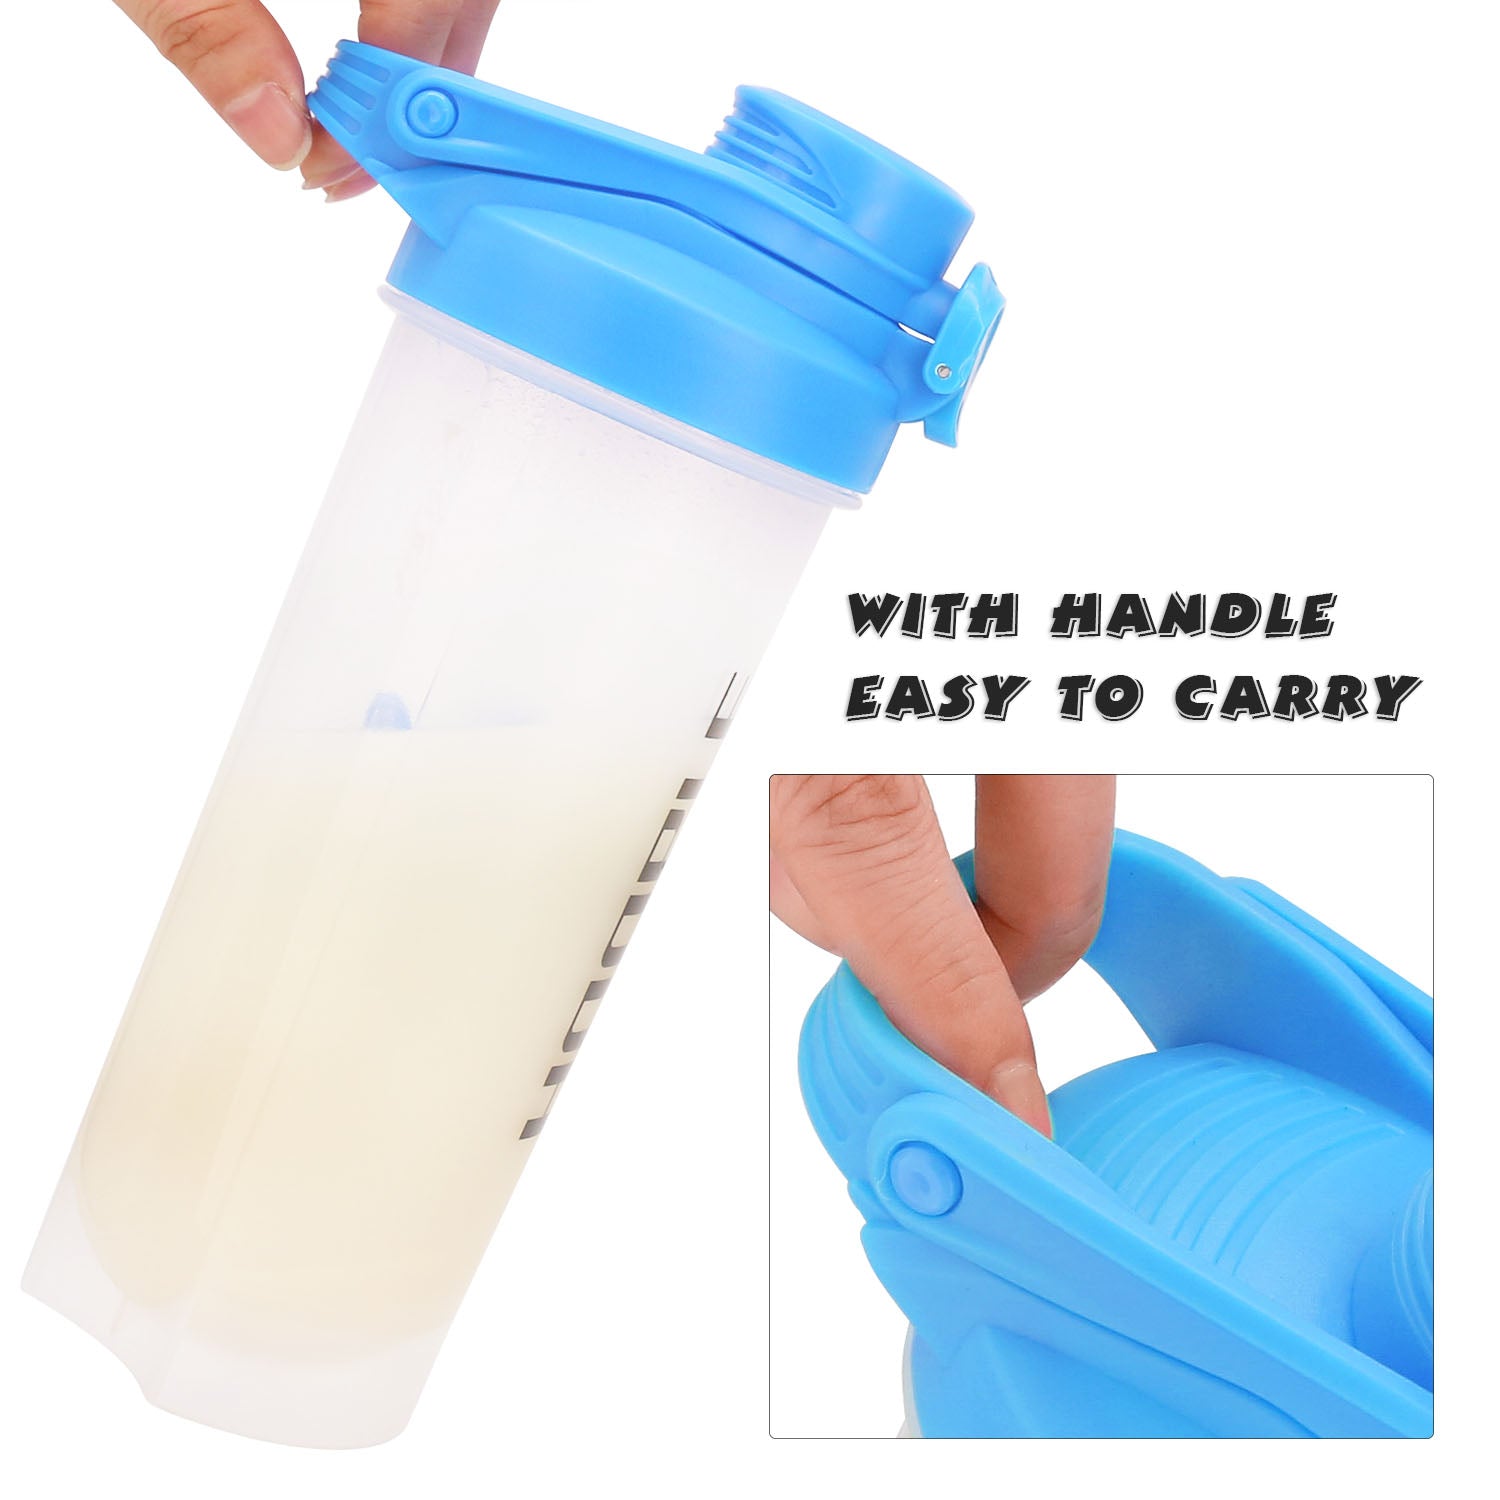 Hoople 24 OZ Shaker Bottle Protein Powder Shake Blender Gym Smoothie Cup, BPA Free, Auto-Flip Leak-Proof Lid, Handle with Ball Included - Clear/Aqua